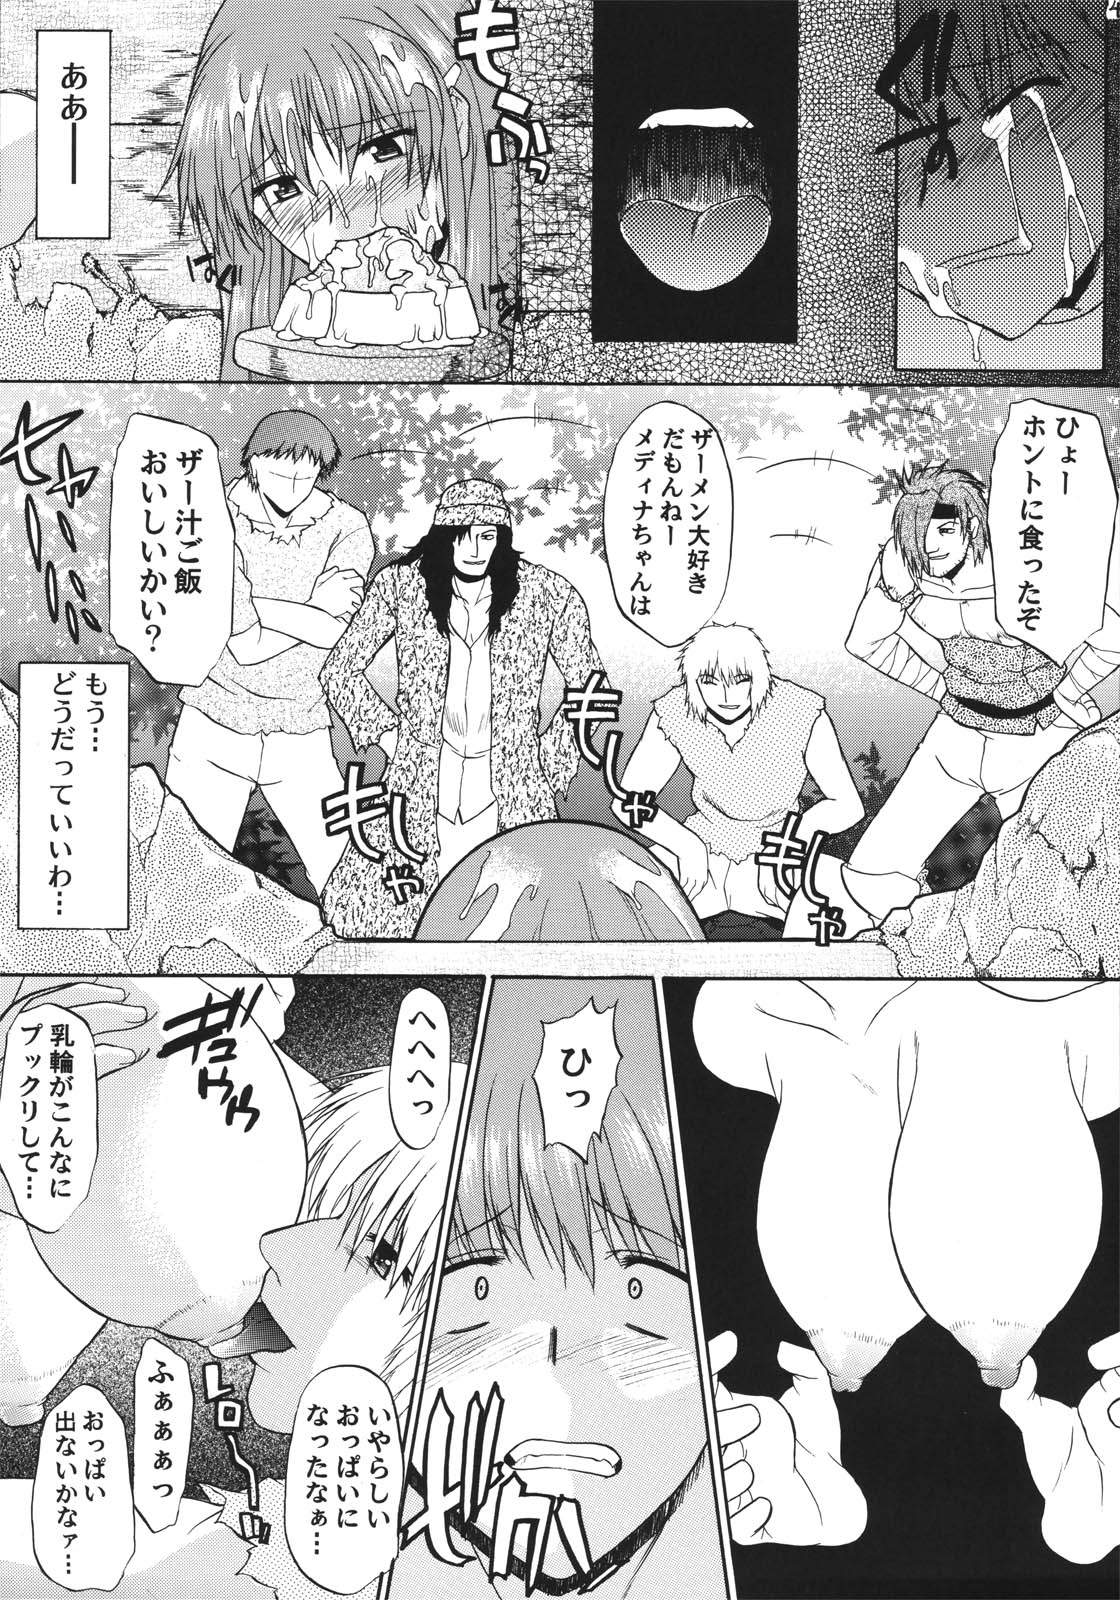 (C66) [Shuudan Bouryoku (Various)] File/12 Record of Aldelayd - EXHIBITION DX4 page 42 full